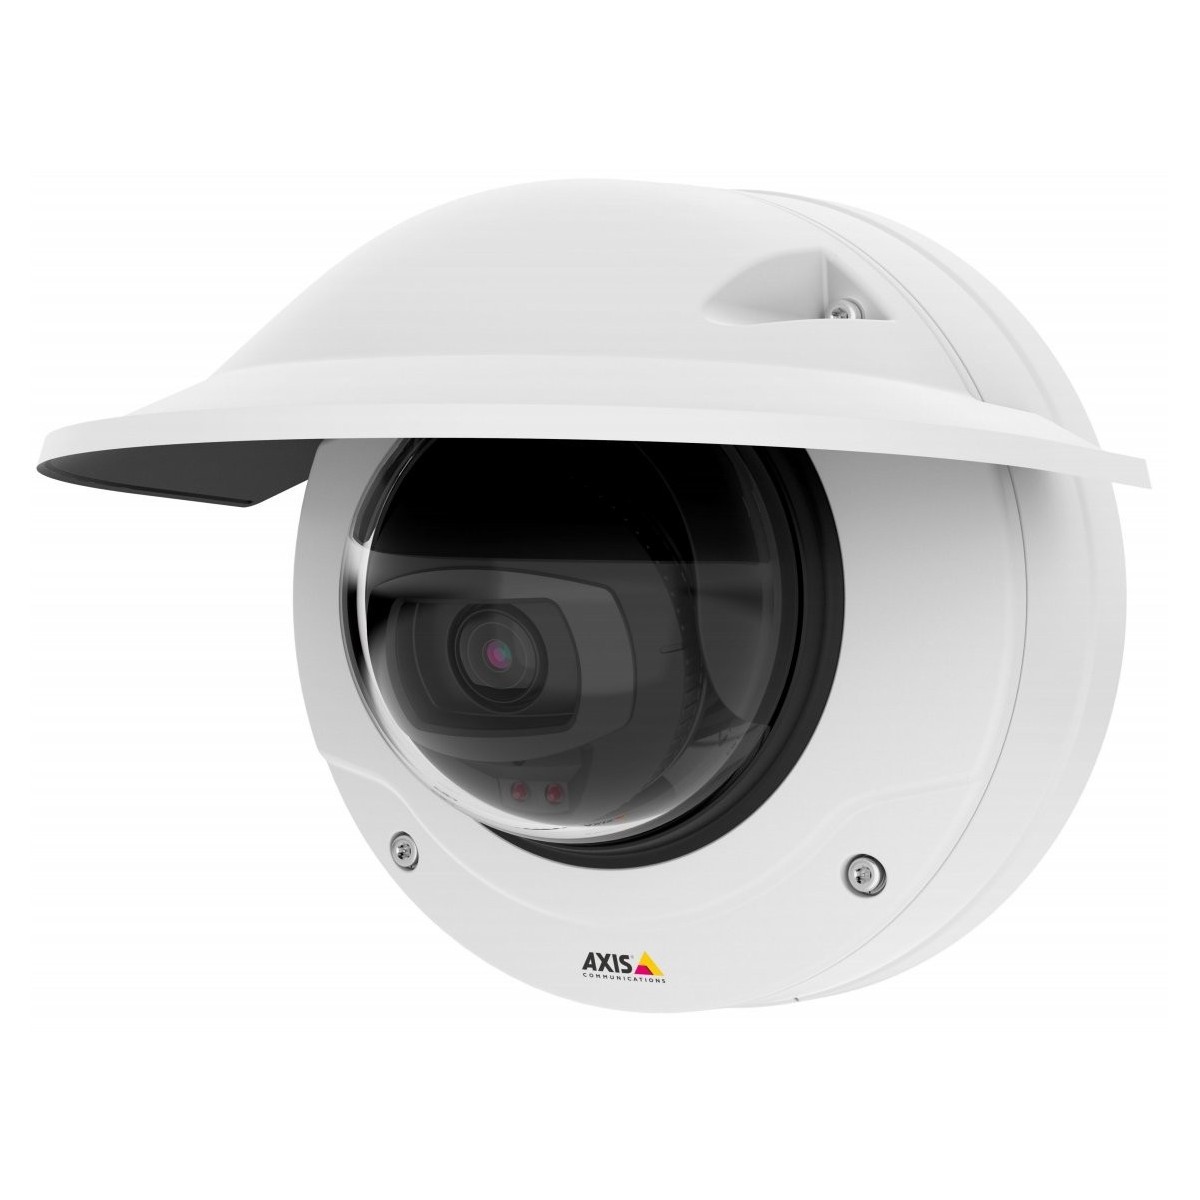 Axis Q3518-LVE - IP security camera - Indoor  outdoor - Wired - Digital PTZ - Simplified Chinese - Traditional Chinese - German 